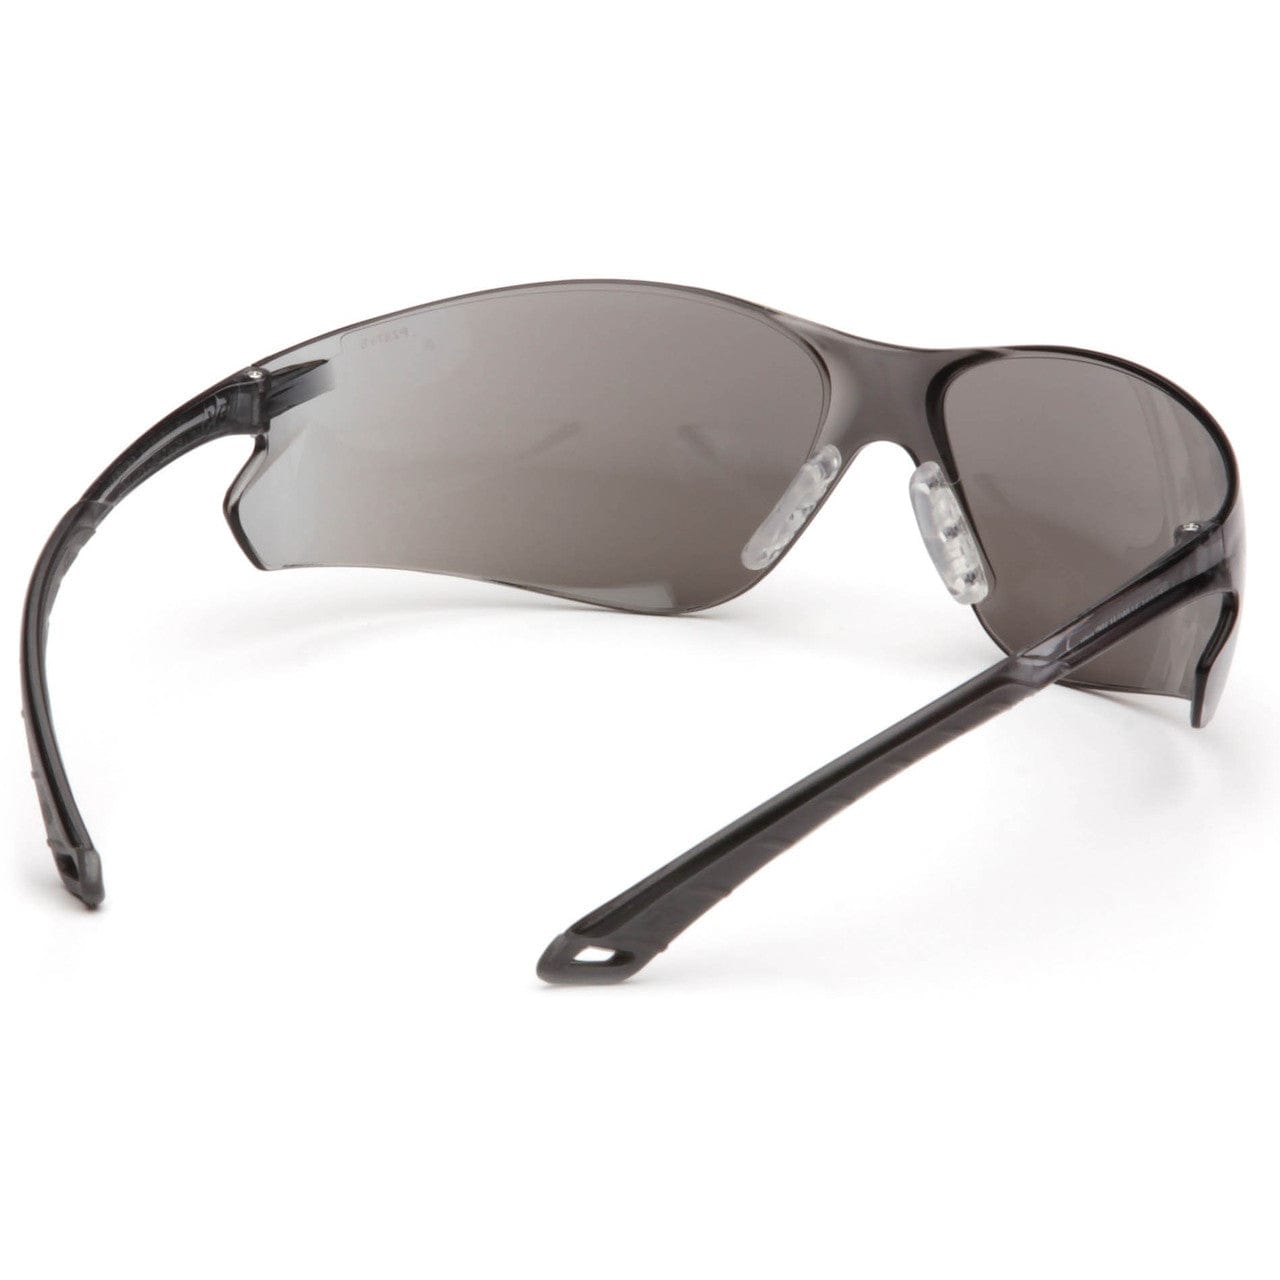 Pyramex Itek Safety Glasses with Silver Mirror Lens S5870S Inside View